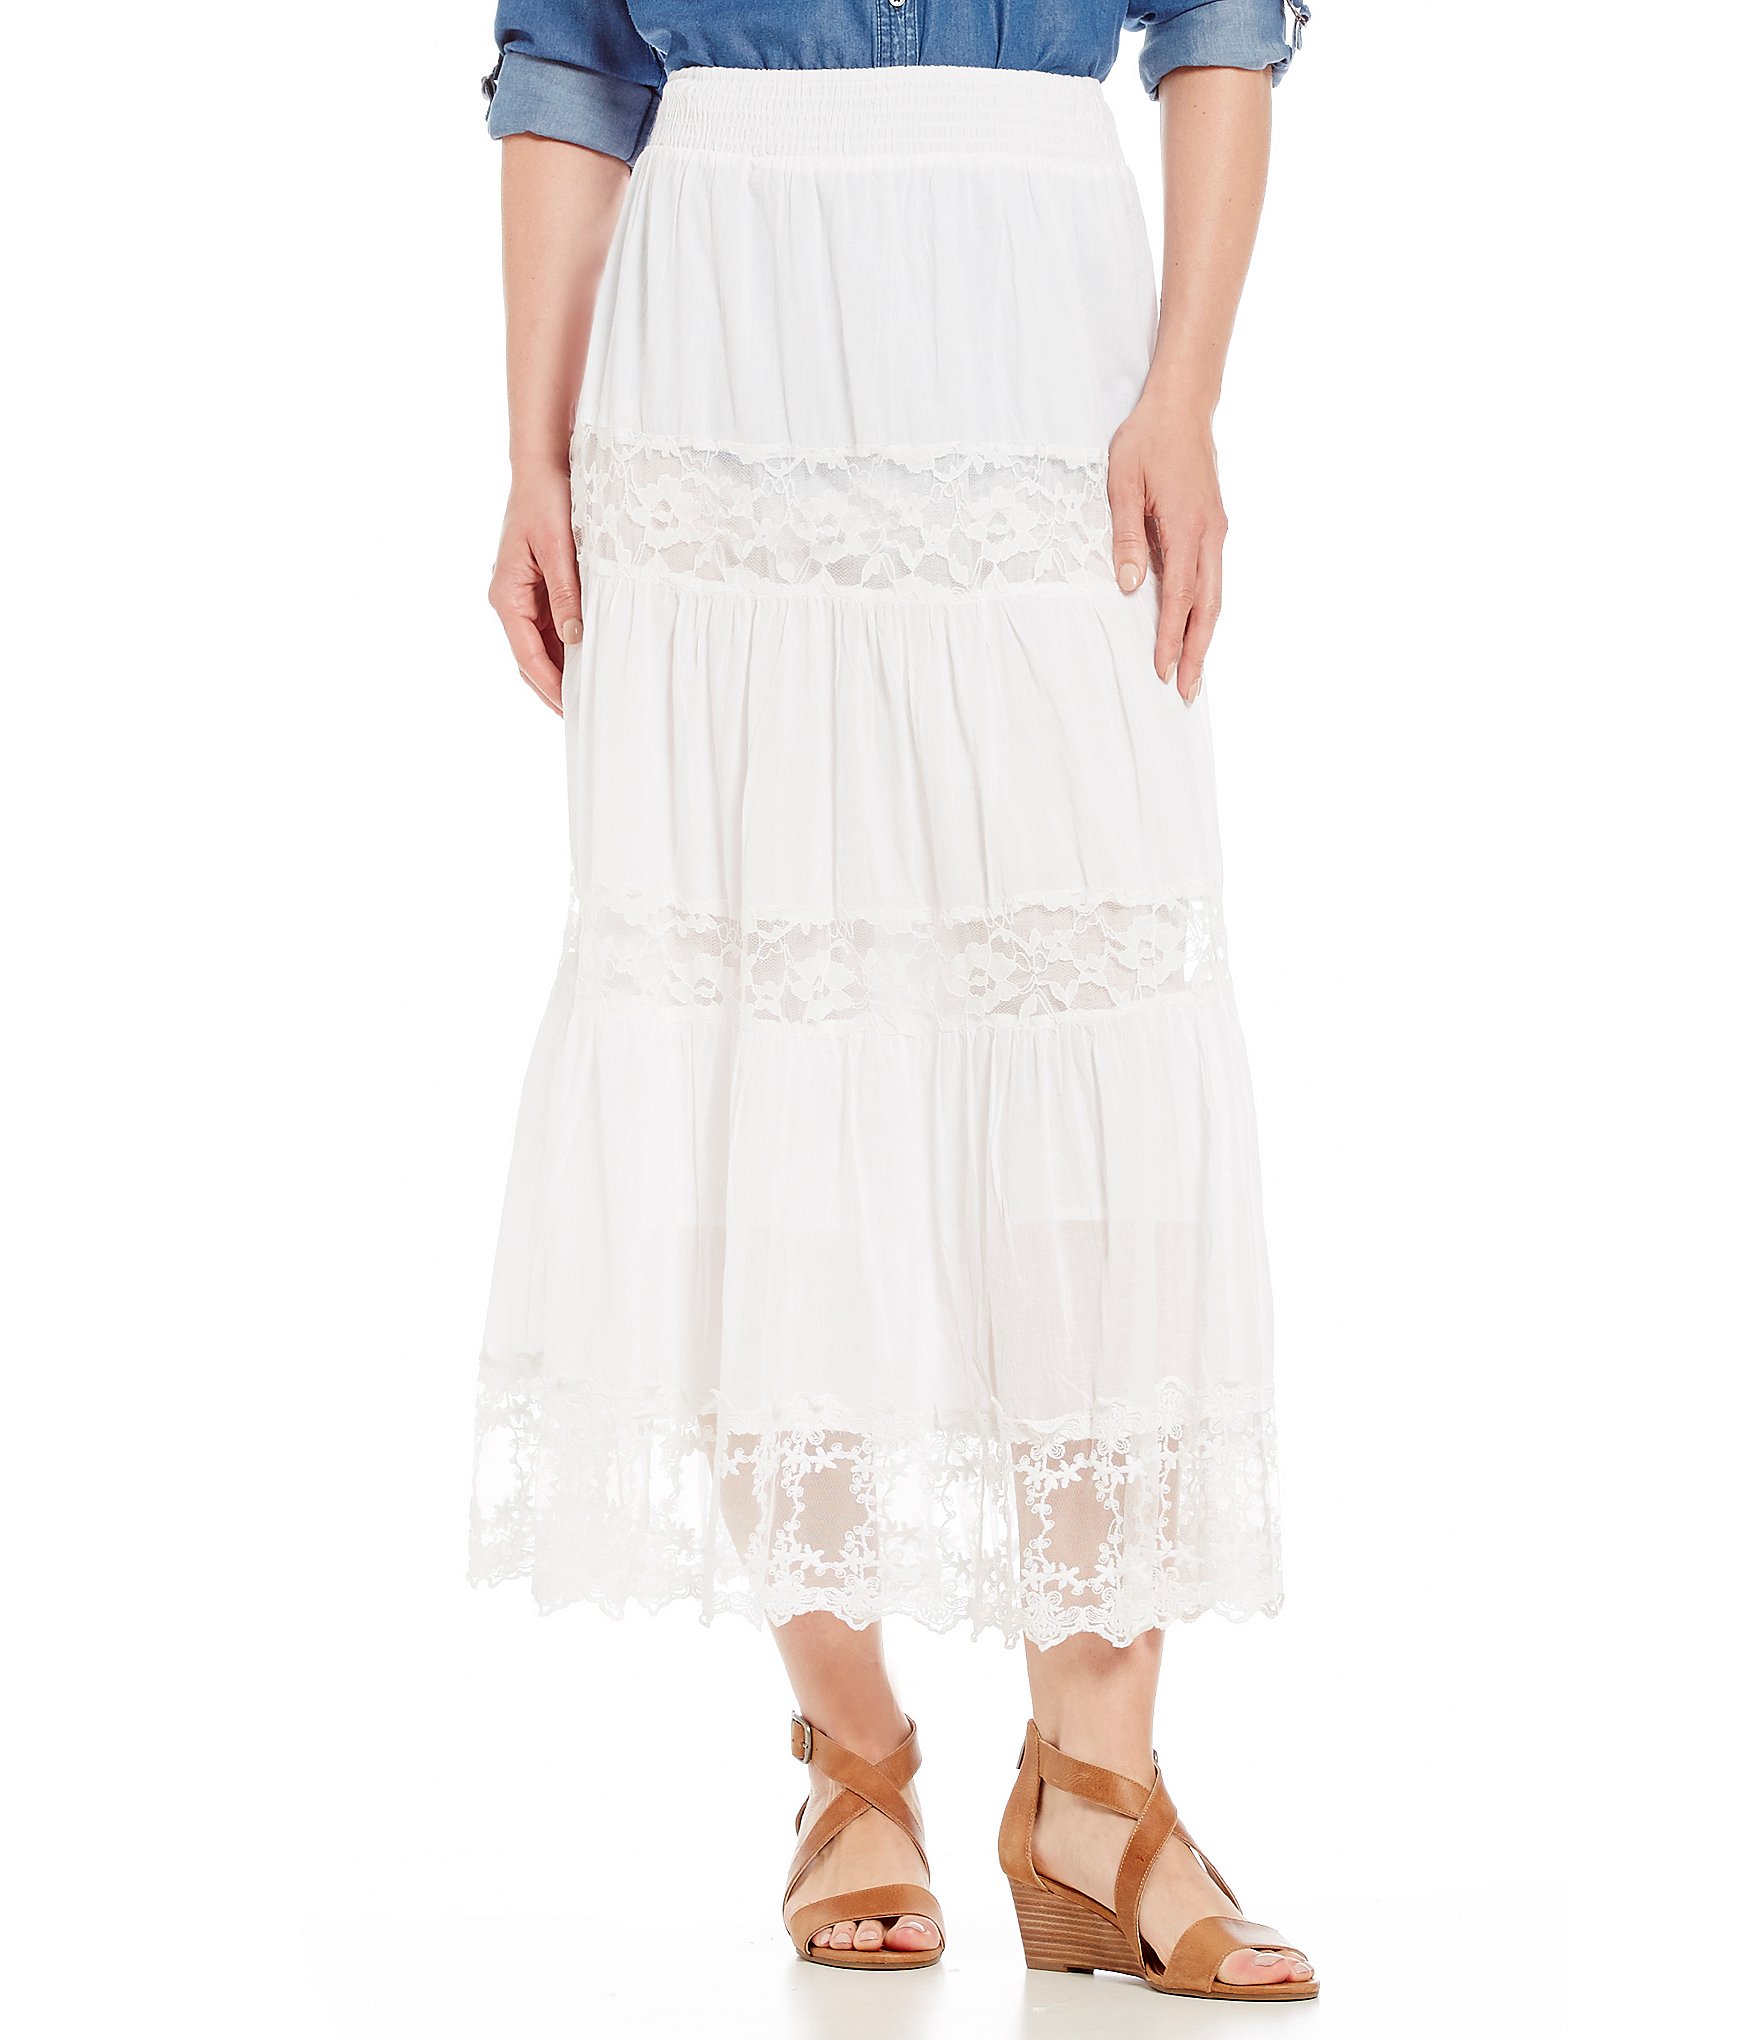 Intro Lace Inset Voile Skirt | Dillards